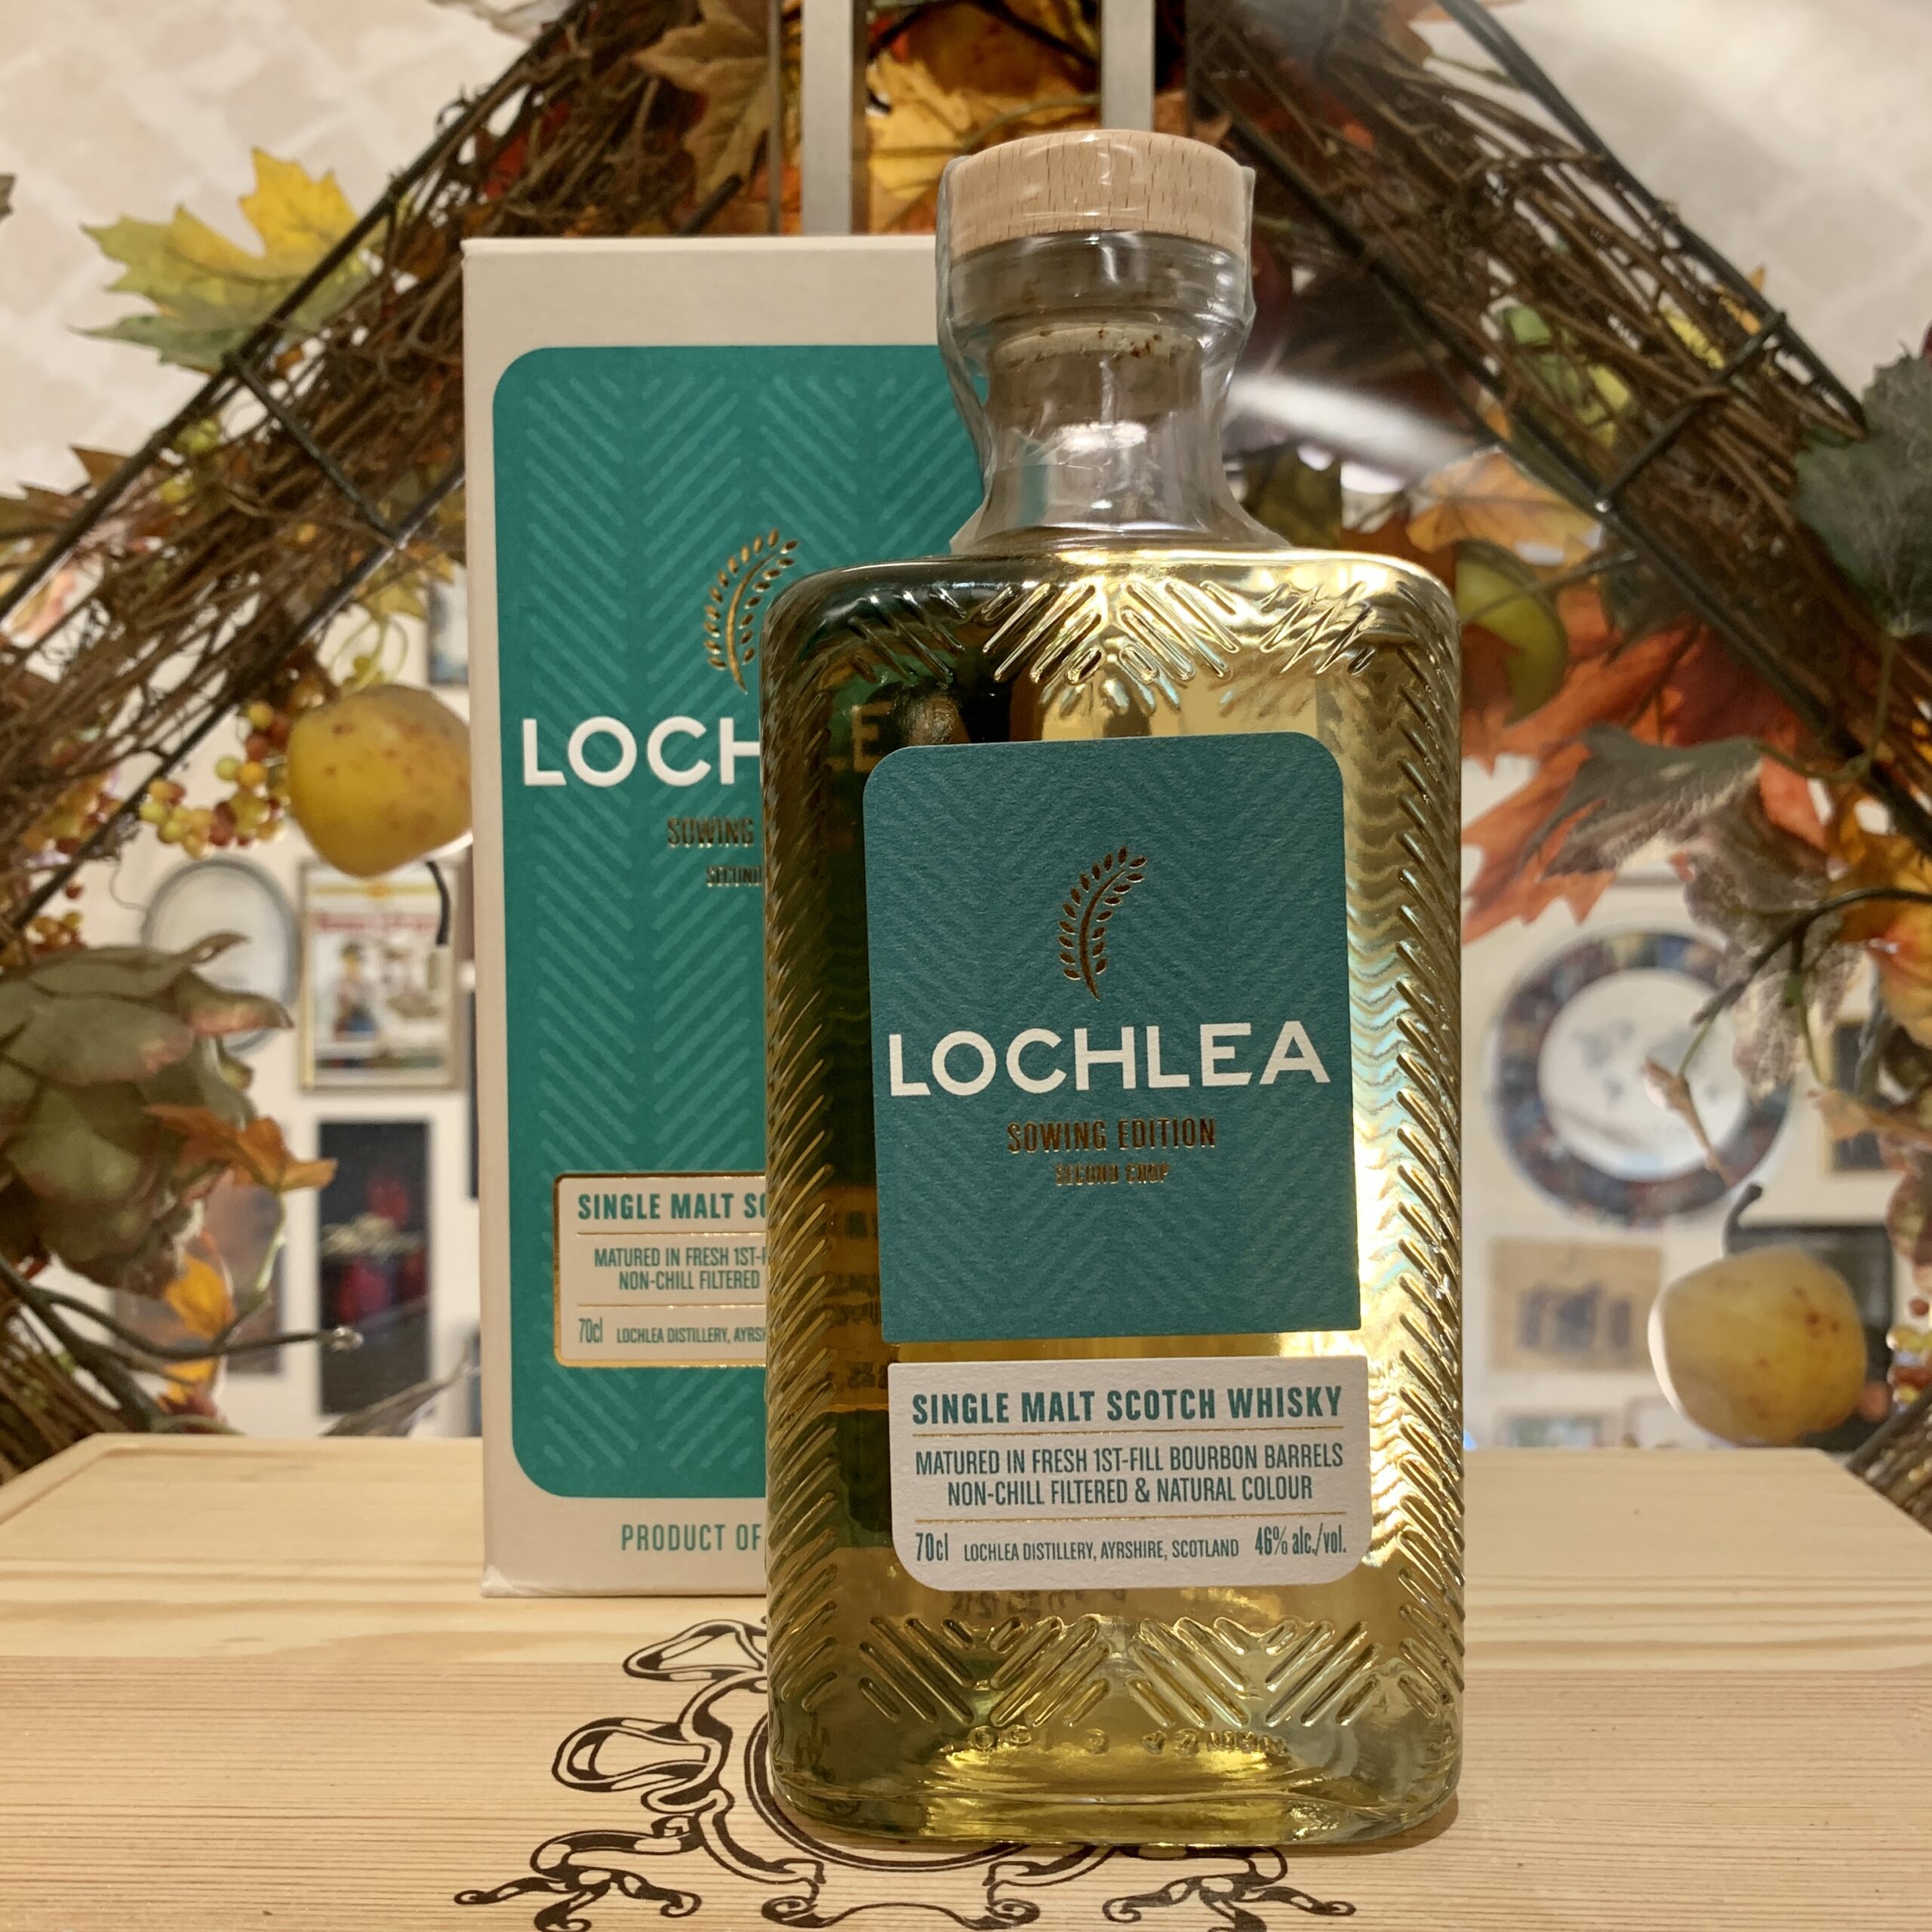 Lochlea “Sowing Edition 2nd Crop” Lowlands Single Malt Scotch Whisky